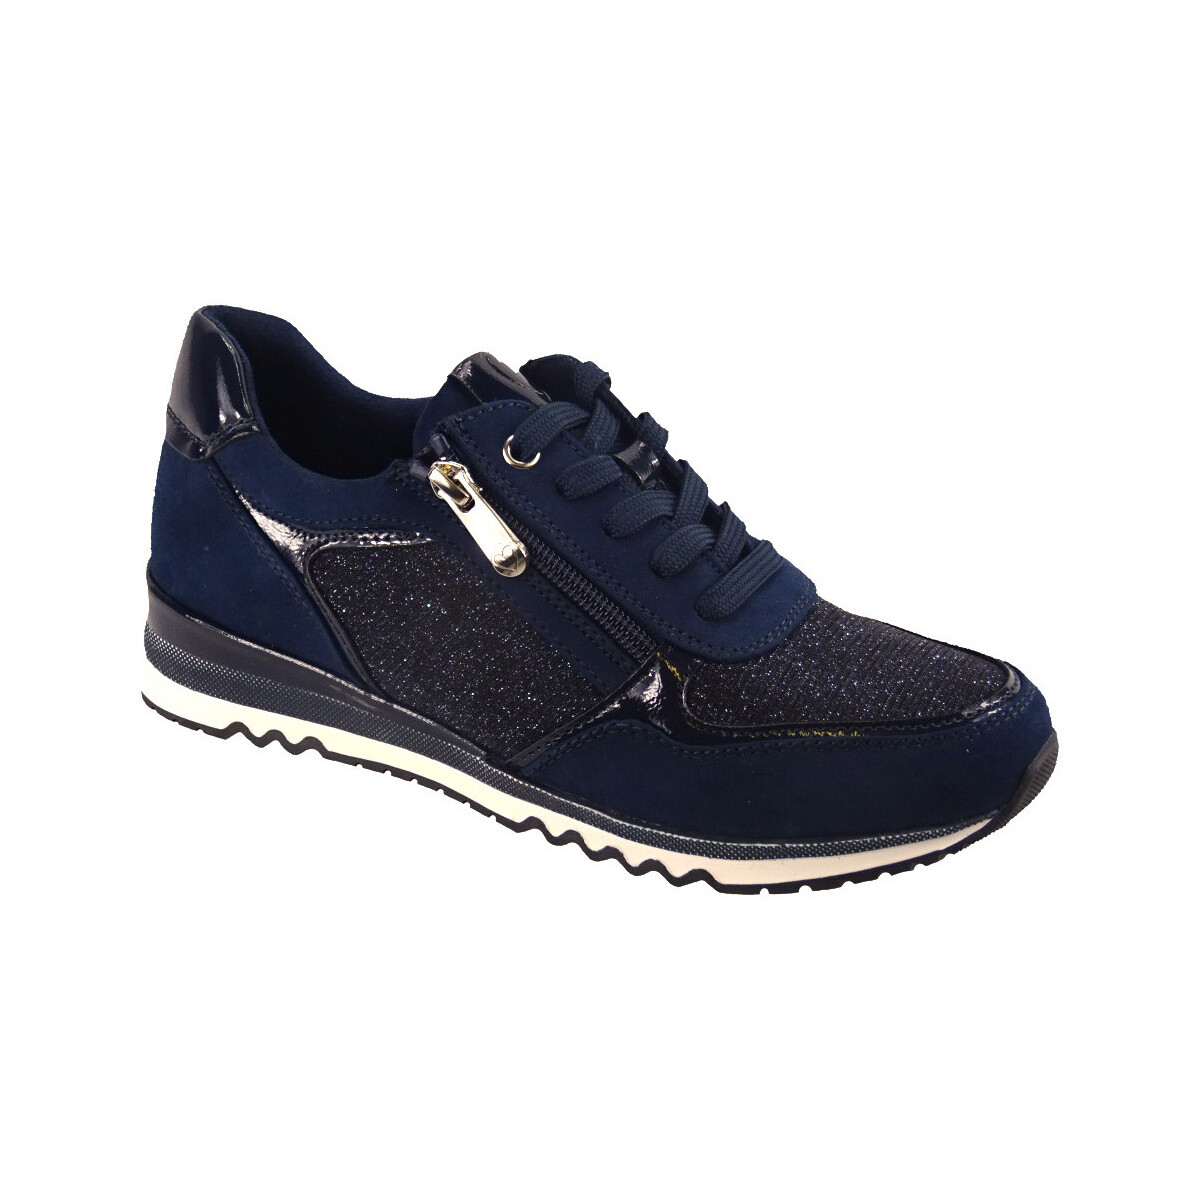 Chaussures Femme Baskets basses Marco Tozzi marcobaskets Marine